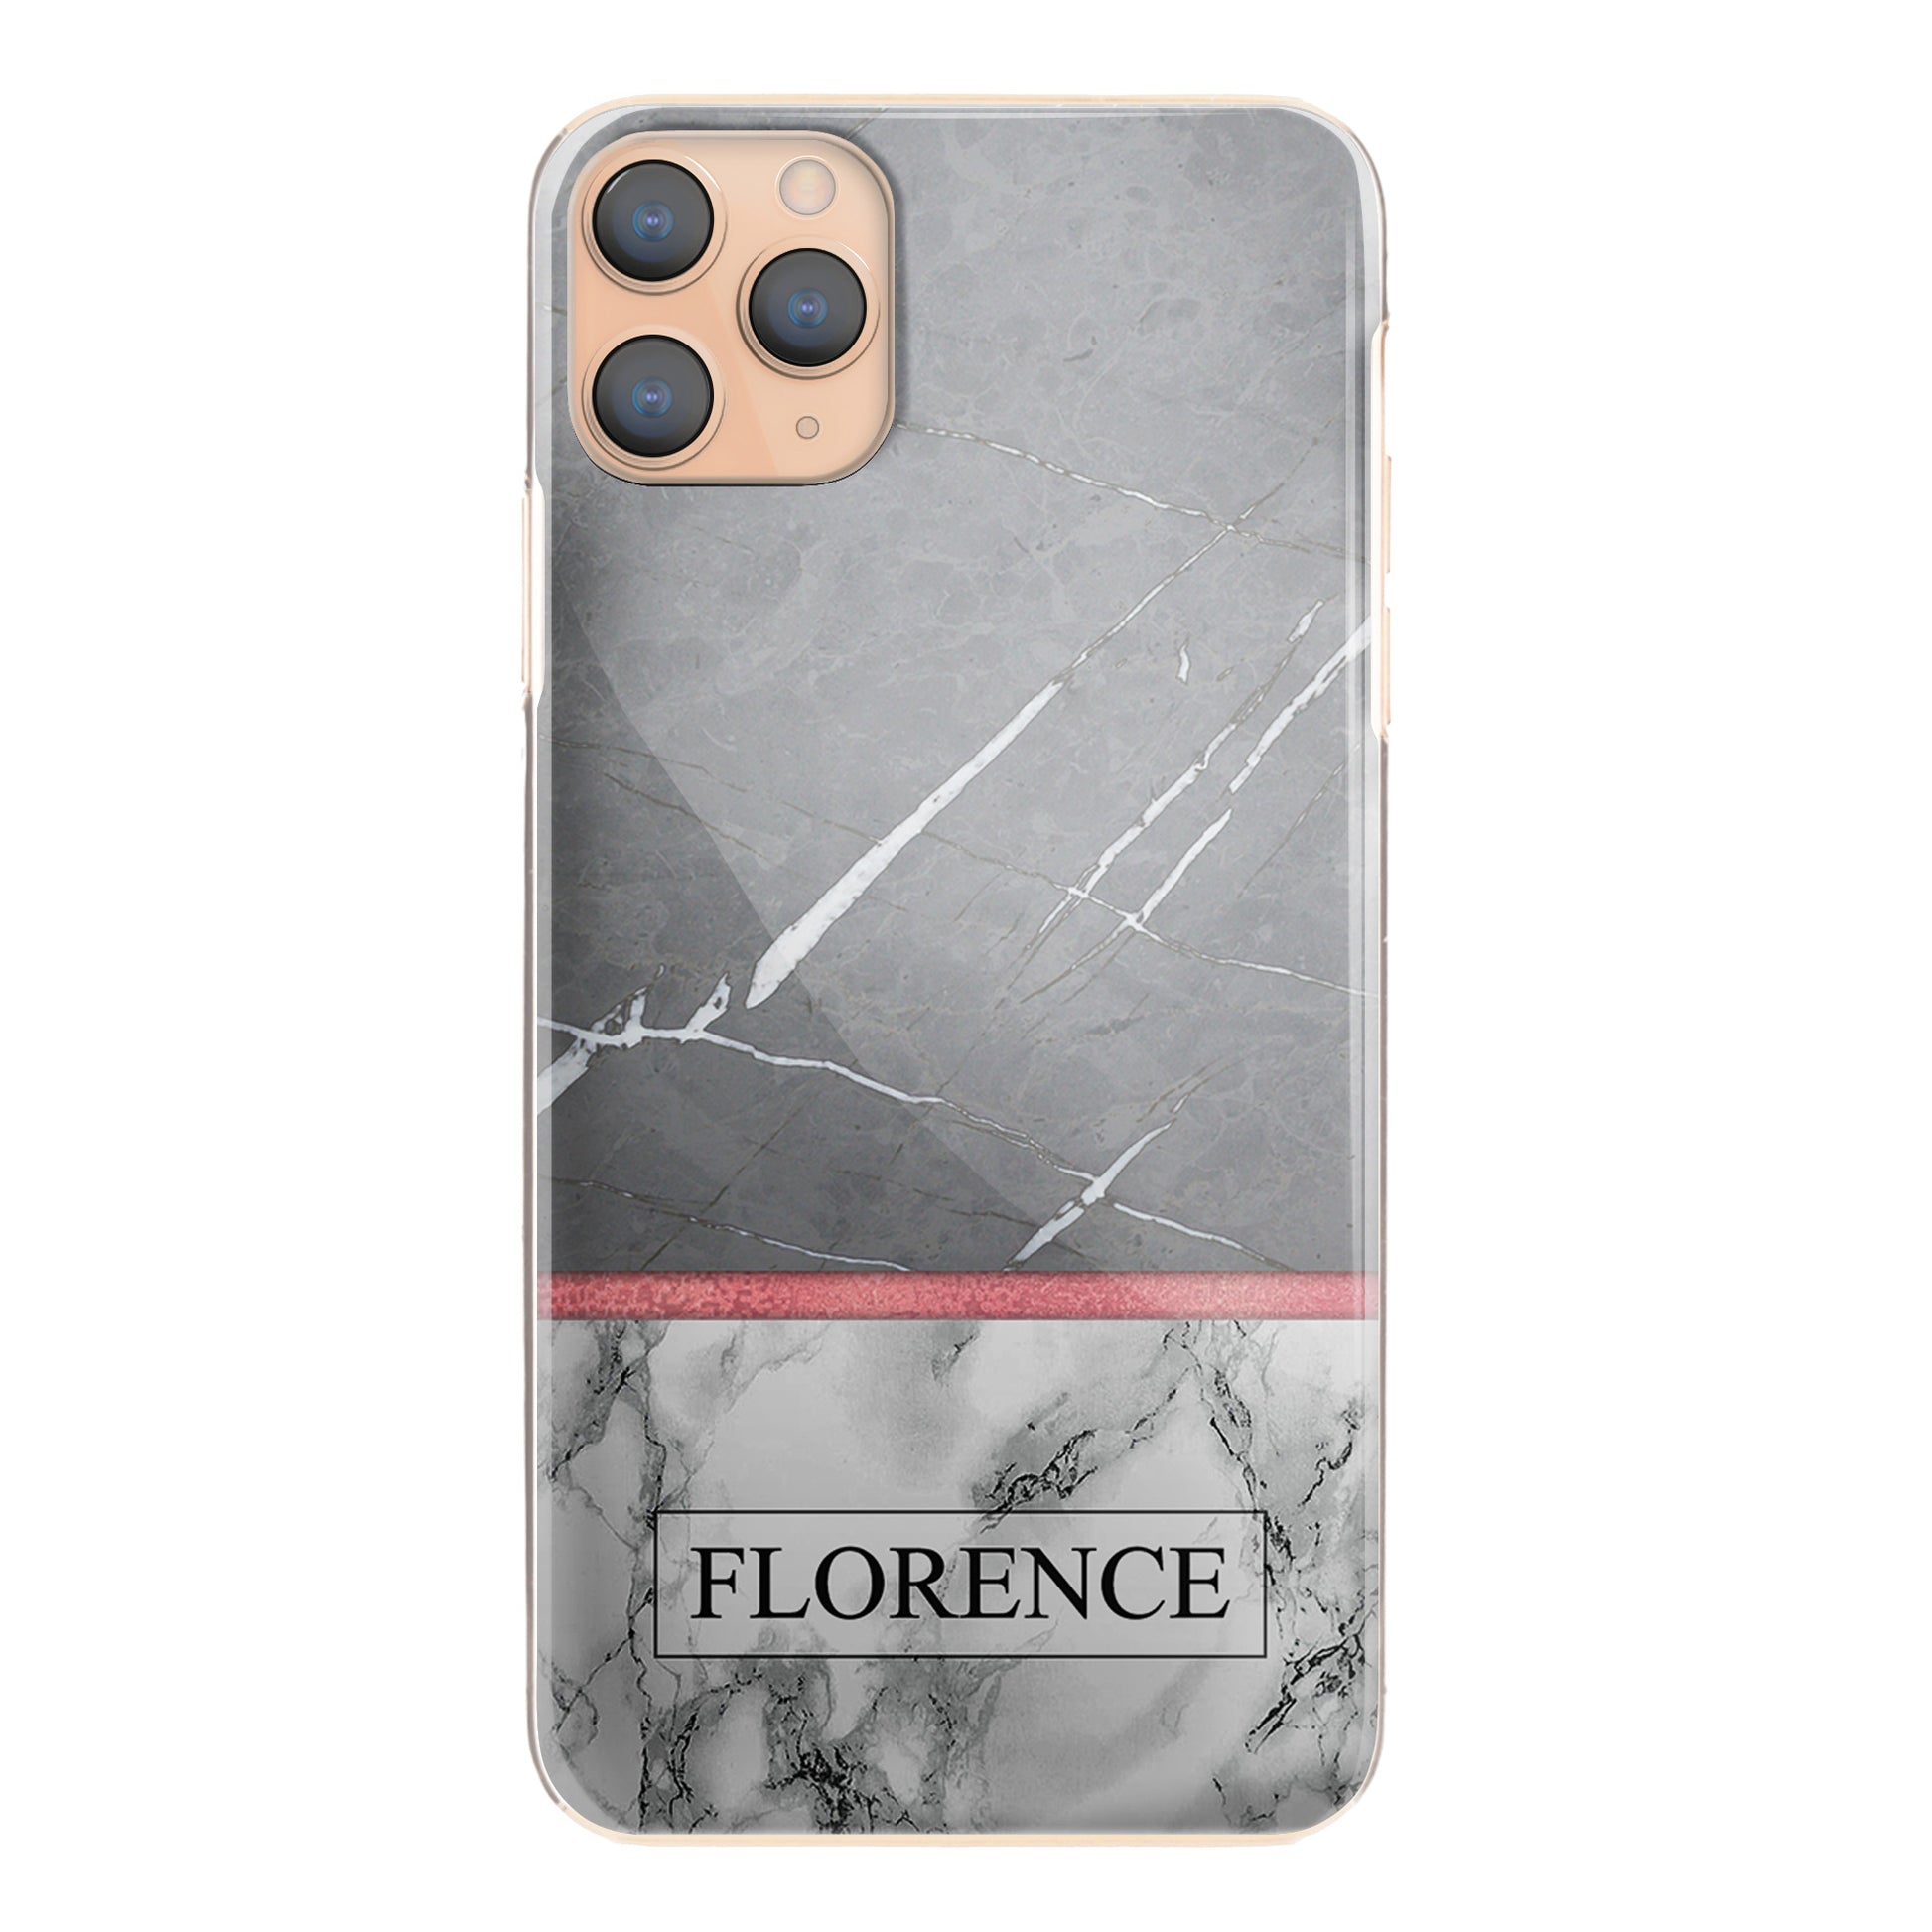 Personalised Oppo Phone Hard Case with Classy Text on Stylish Dual Marble